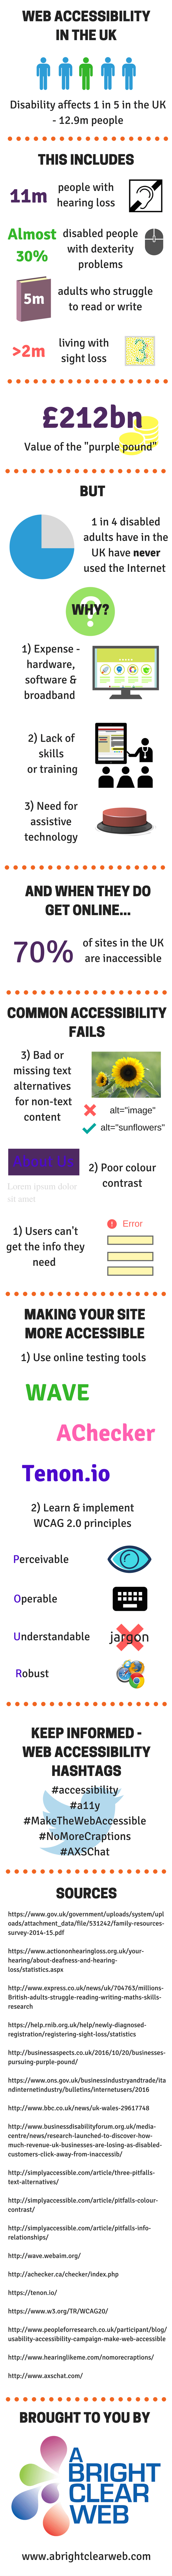 Web Accessibility in the UK